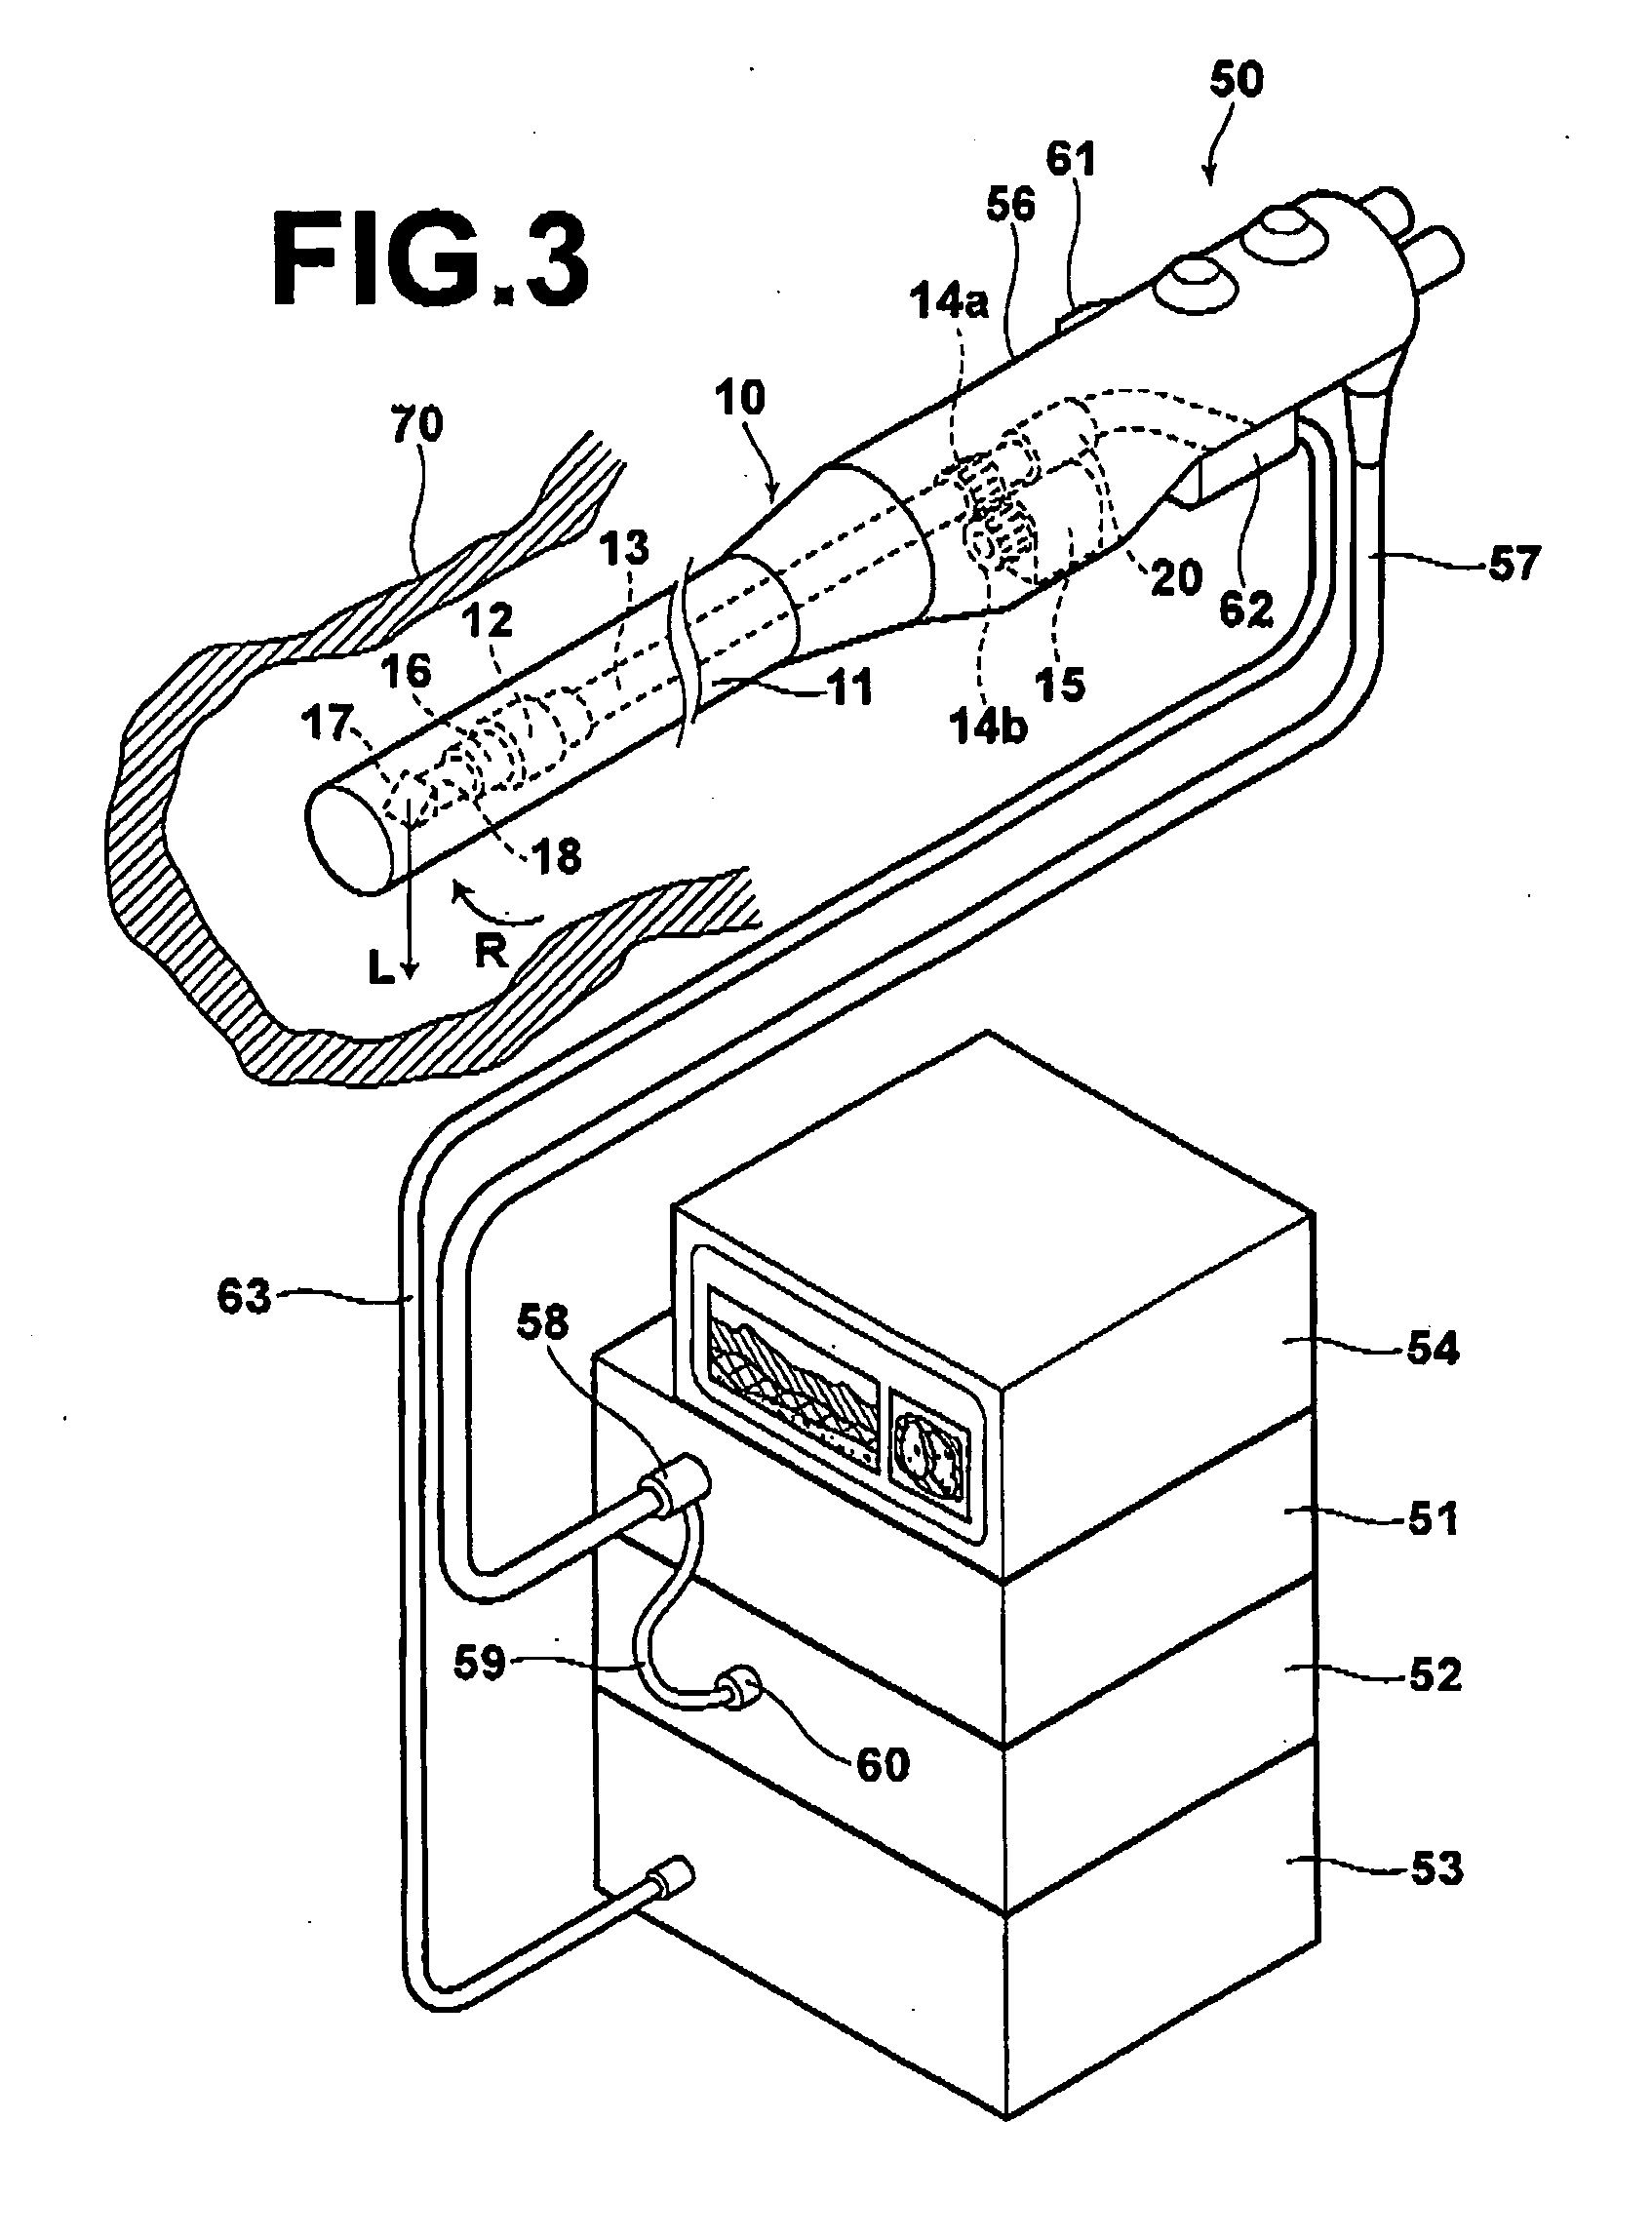 Optical probe and optical tomography system